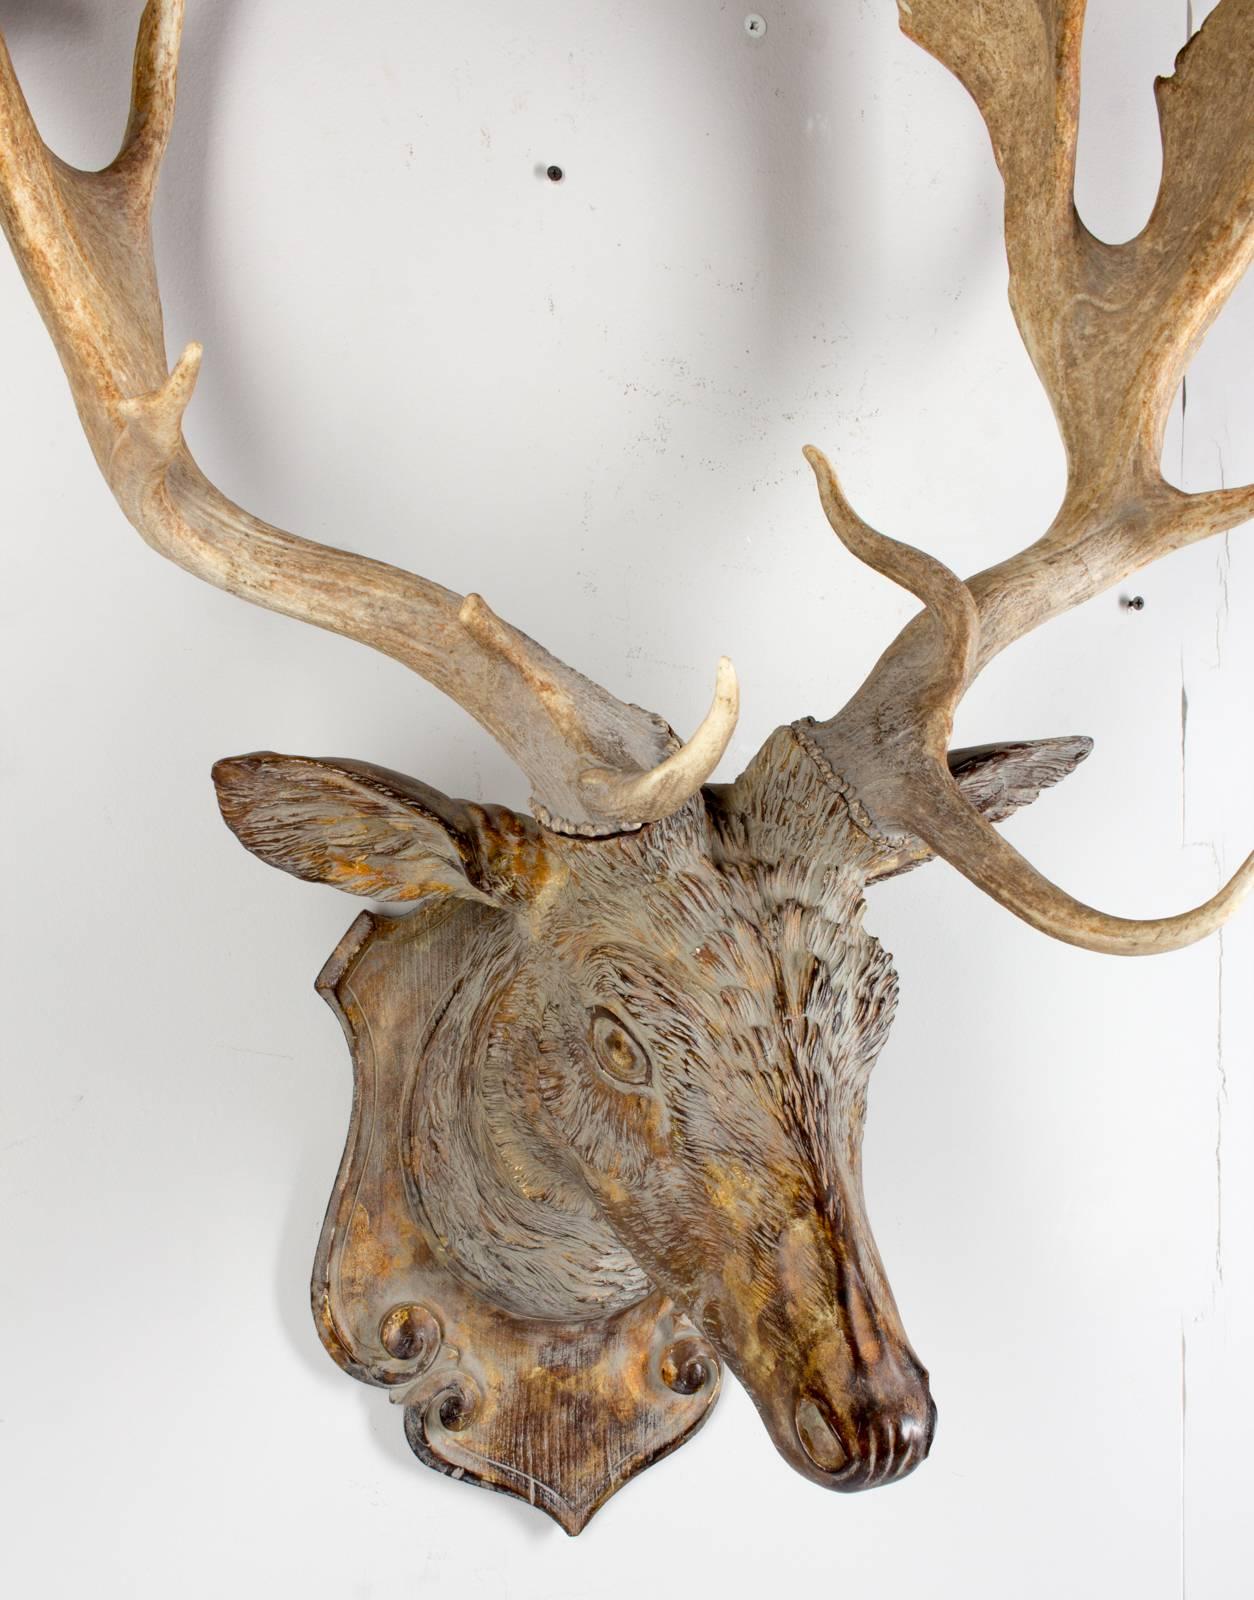 An exquisite Fallow Deer hunting trophy crafted of terracotta faux bois with 19th century Habsburg antlers from Emperor Franz Josef's castle at Eckartsau in the Southern Austrian Alps, a favorite hunting schloss of the Habsburg royal family. The